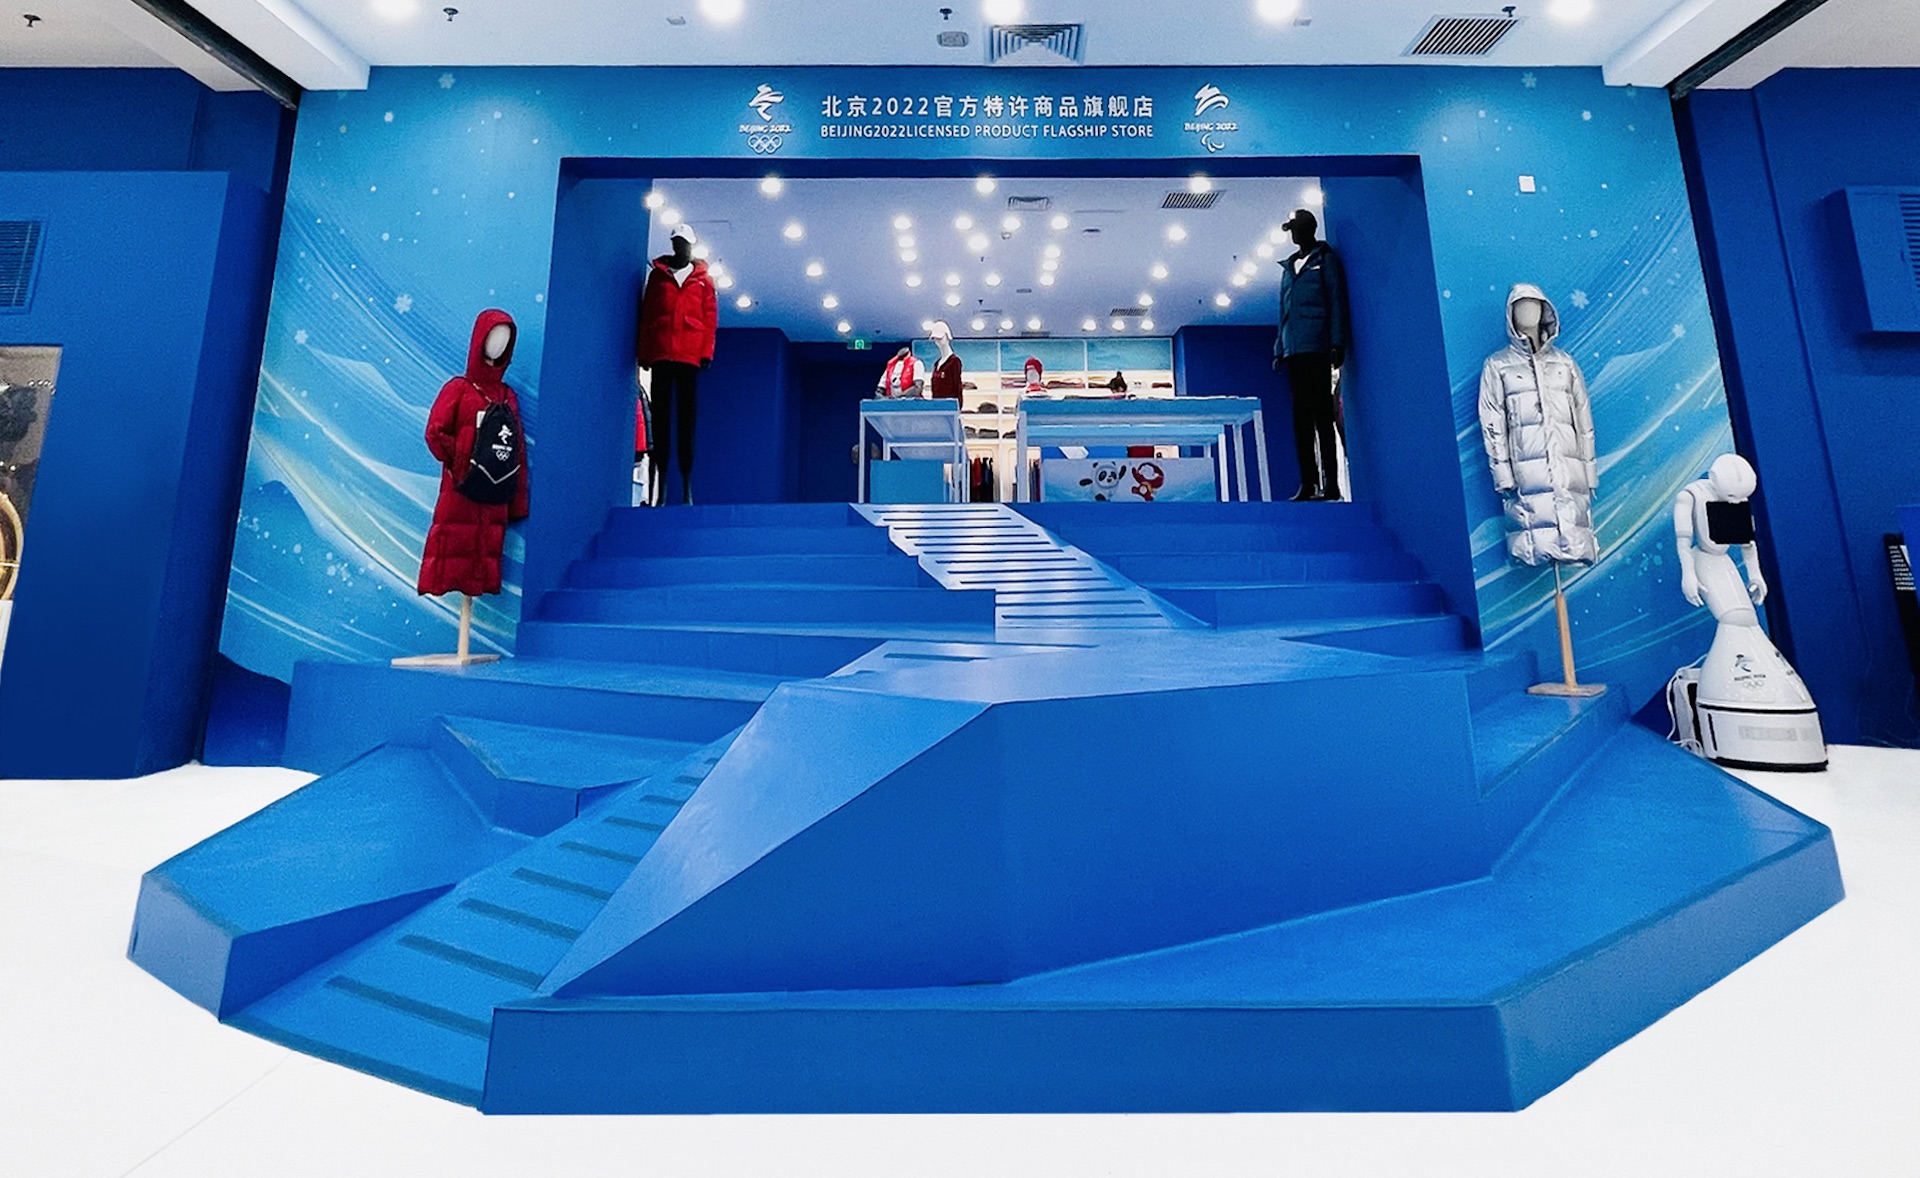 MUSE Design Winners - Flagship Store Design for Beijing 2022 Winter Olympics